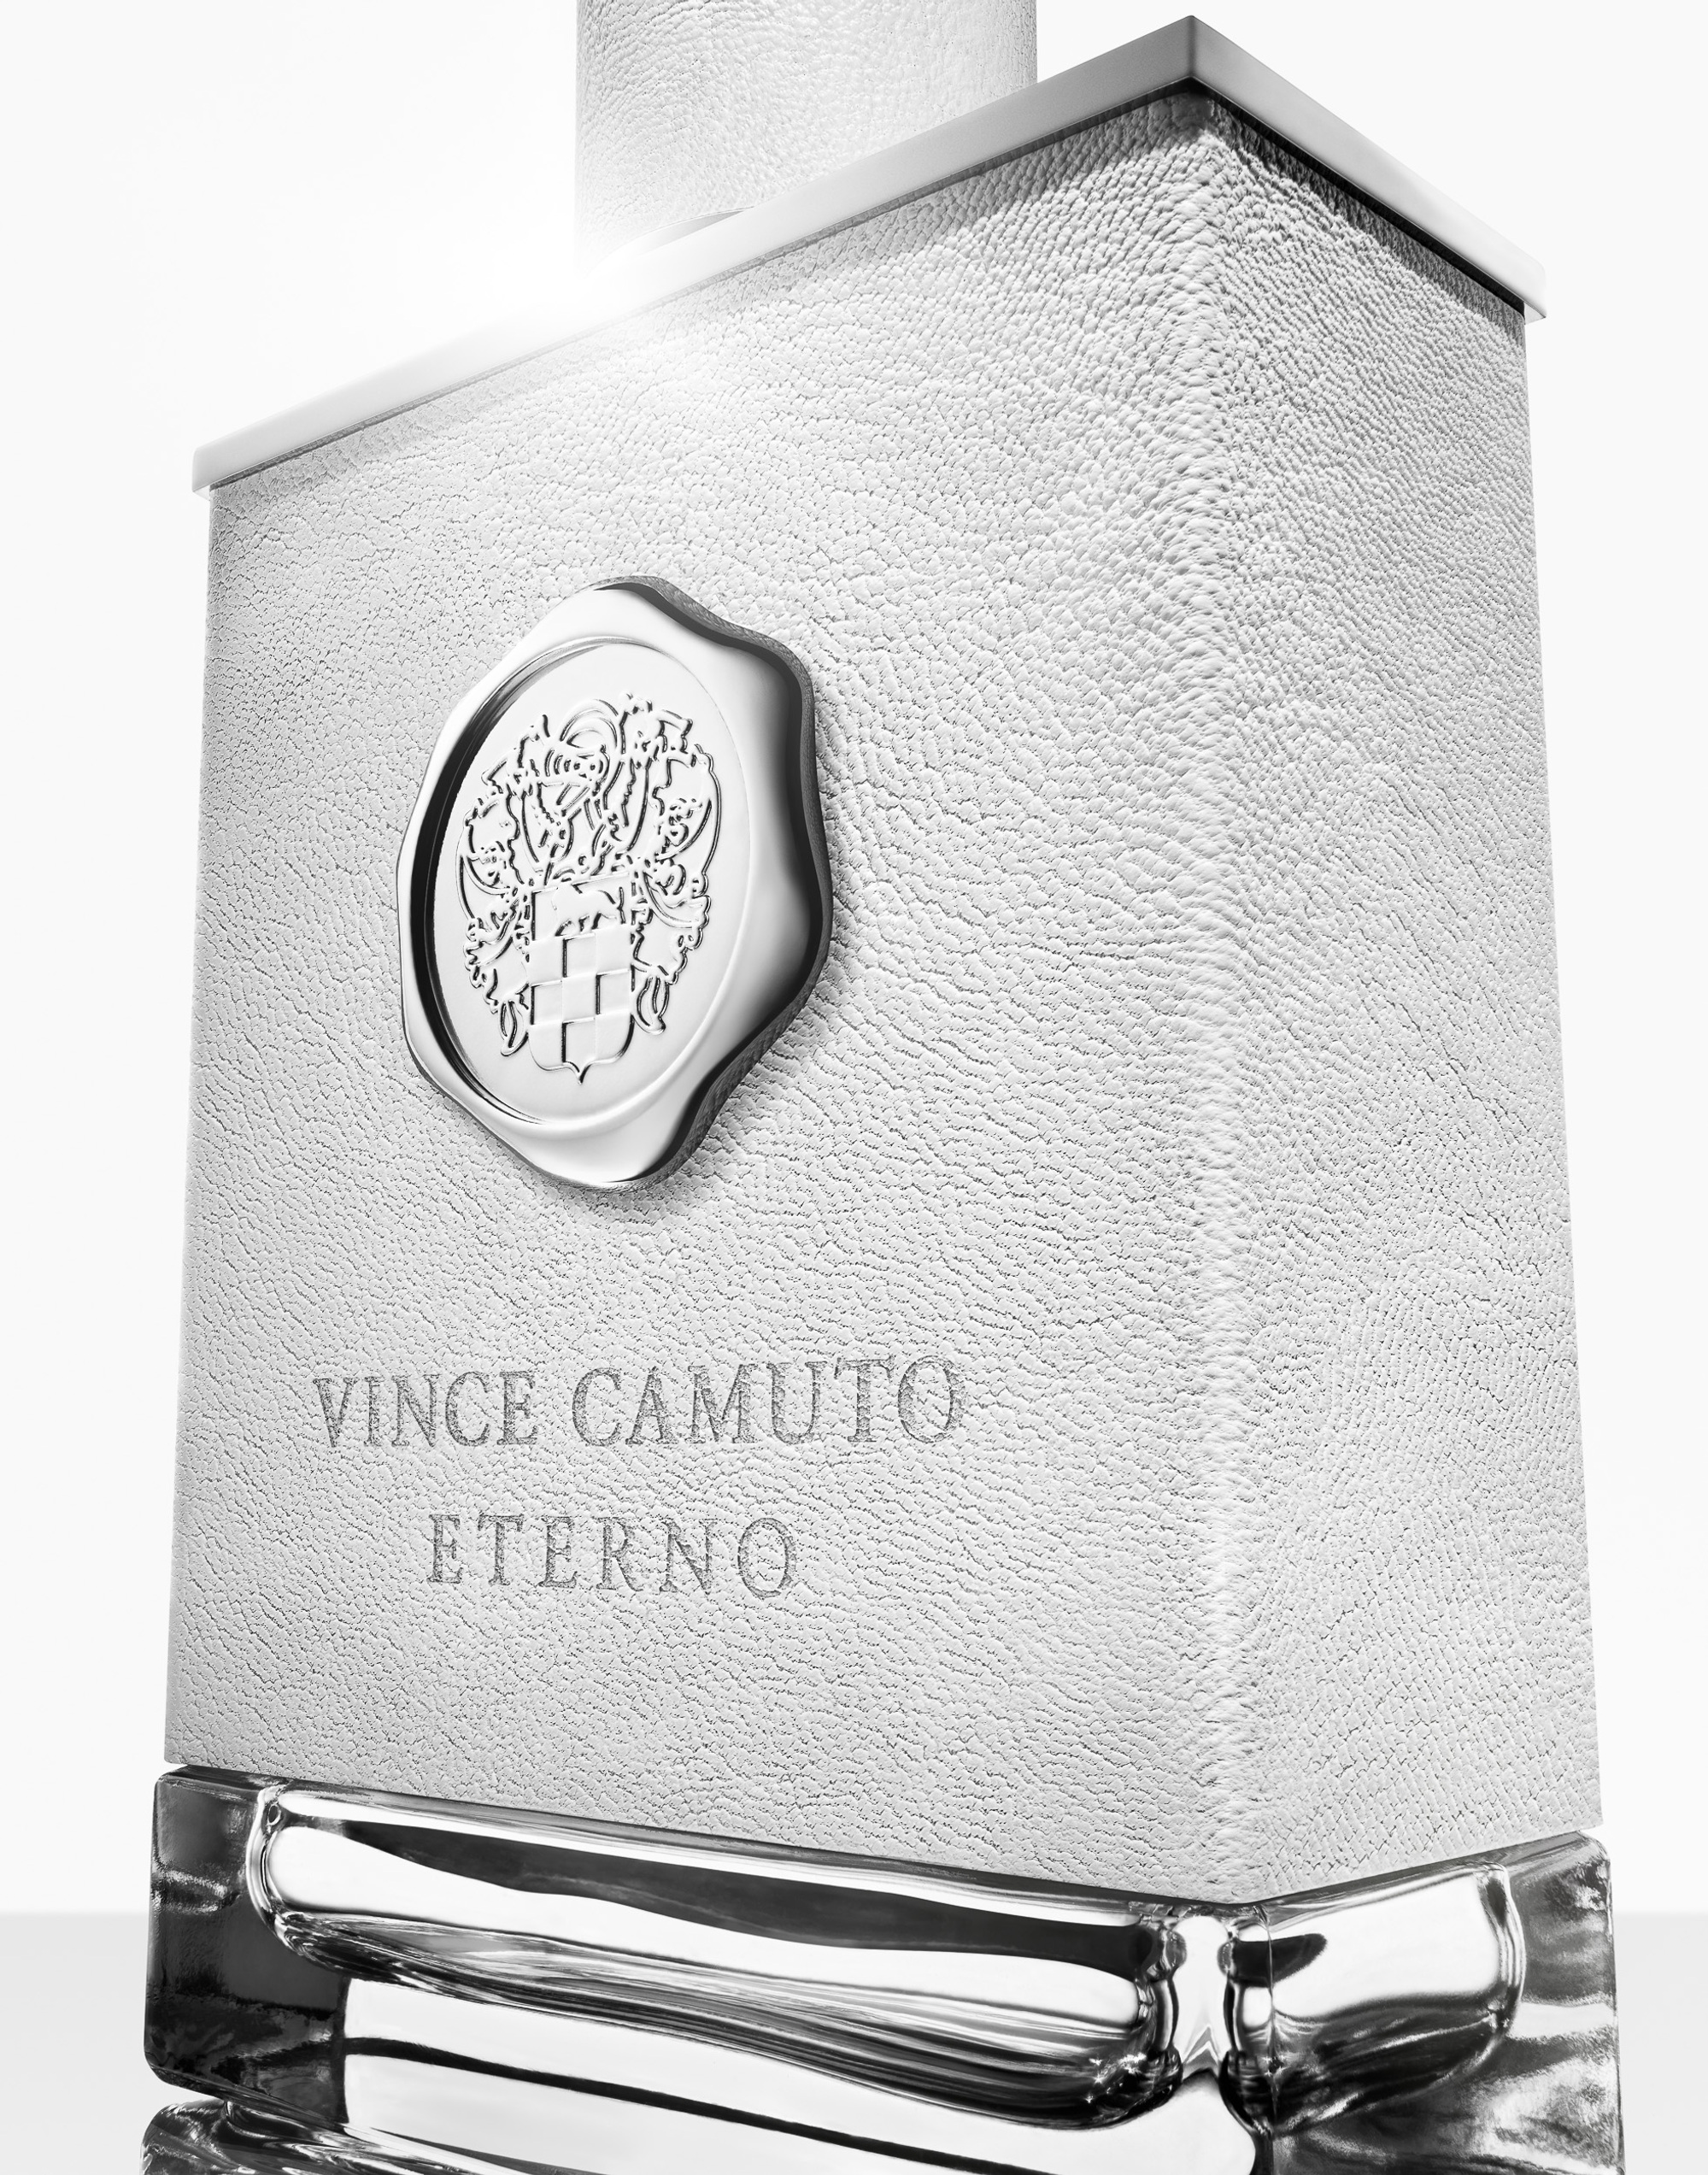 Vince Camuto Men Perfume & Fragrance photography by commercial, product & advertising photographer Timothy Hogan in the Los Angeles Studio